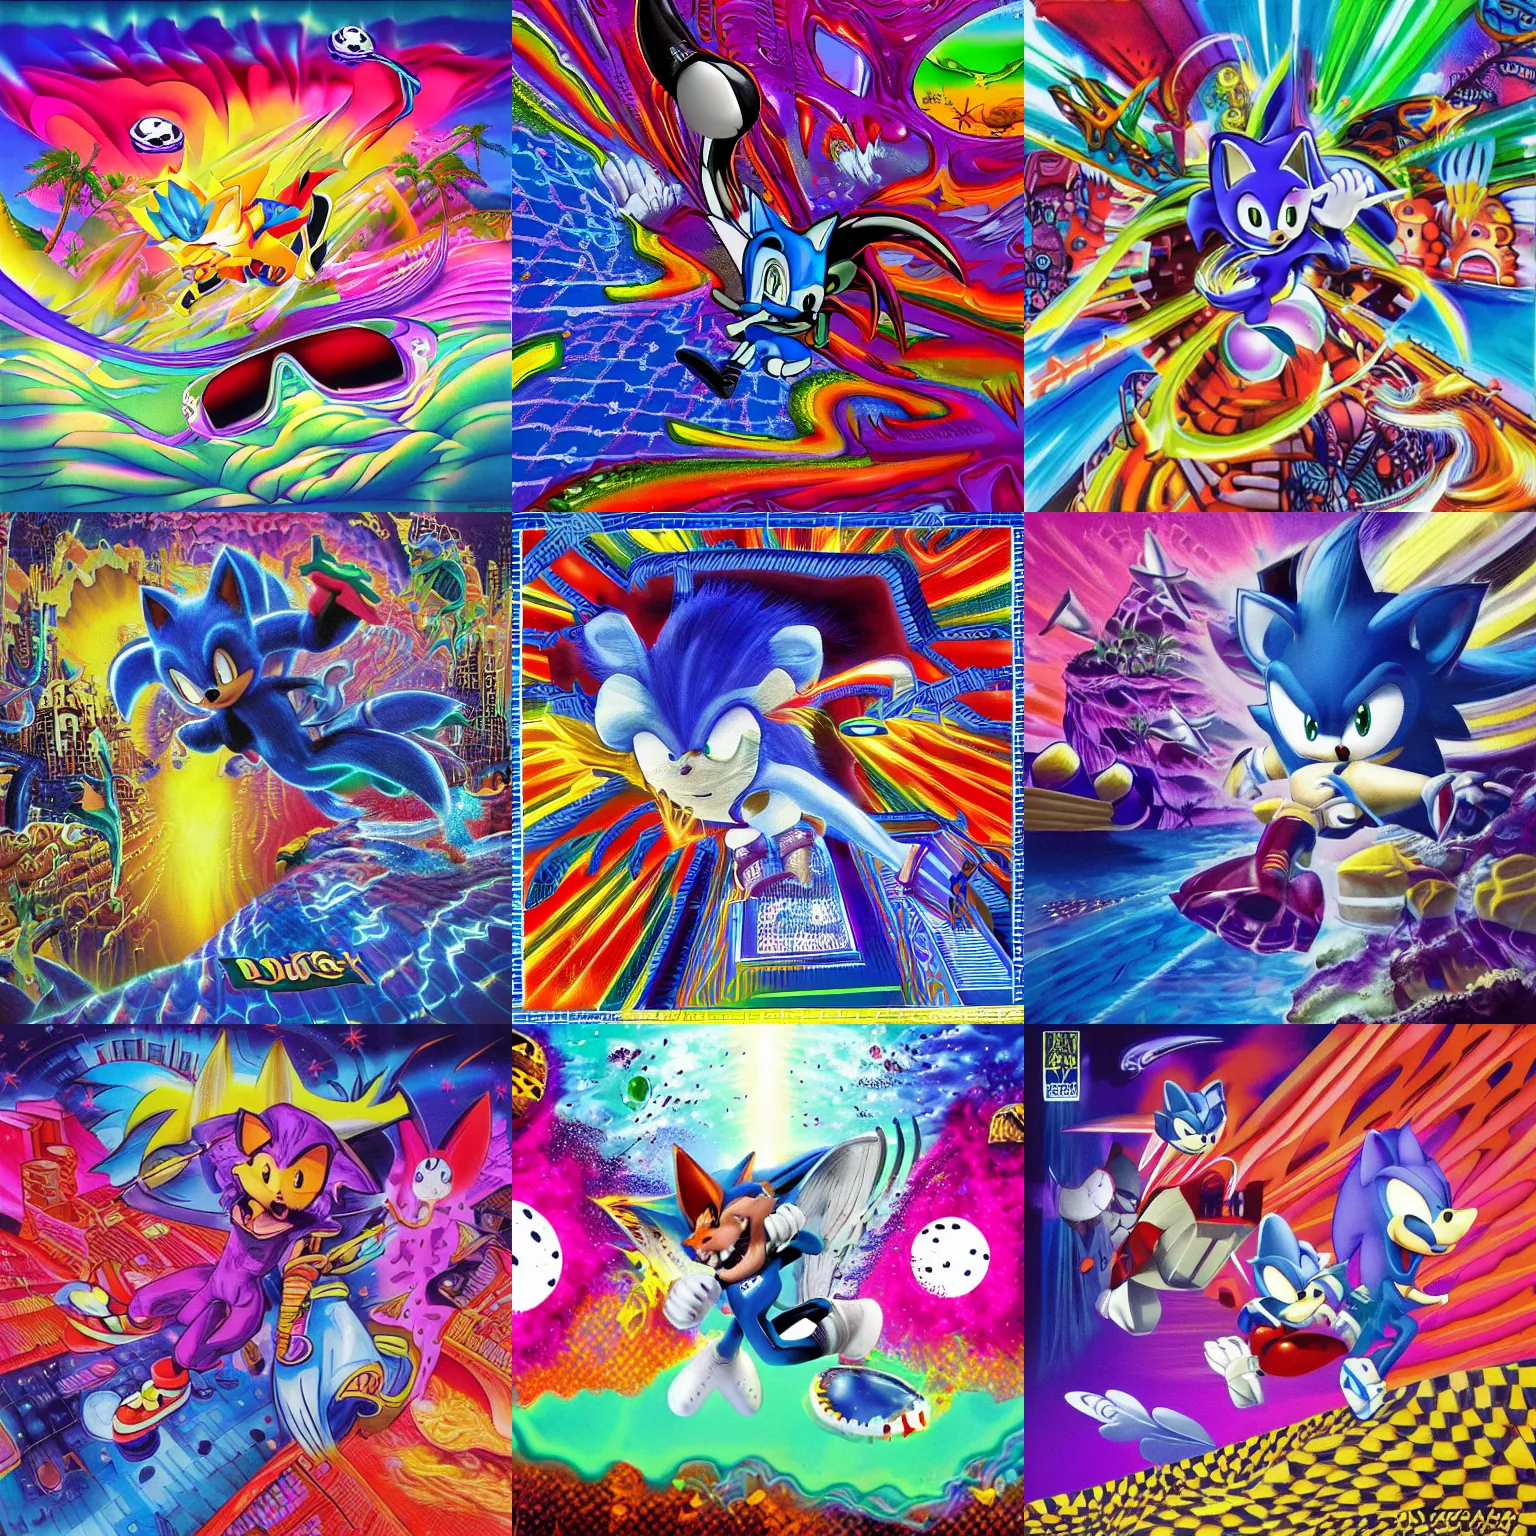 Prompt: surreal, sharp, detailed professional, high quality airbrush art MGMT album cover of a liquid dissolving LSD DMT blue sonic the hedgehog surfing through cyberspace, purple checkerboard background, 1990s 1992 Sega Genesis video game album cover